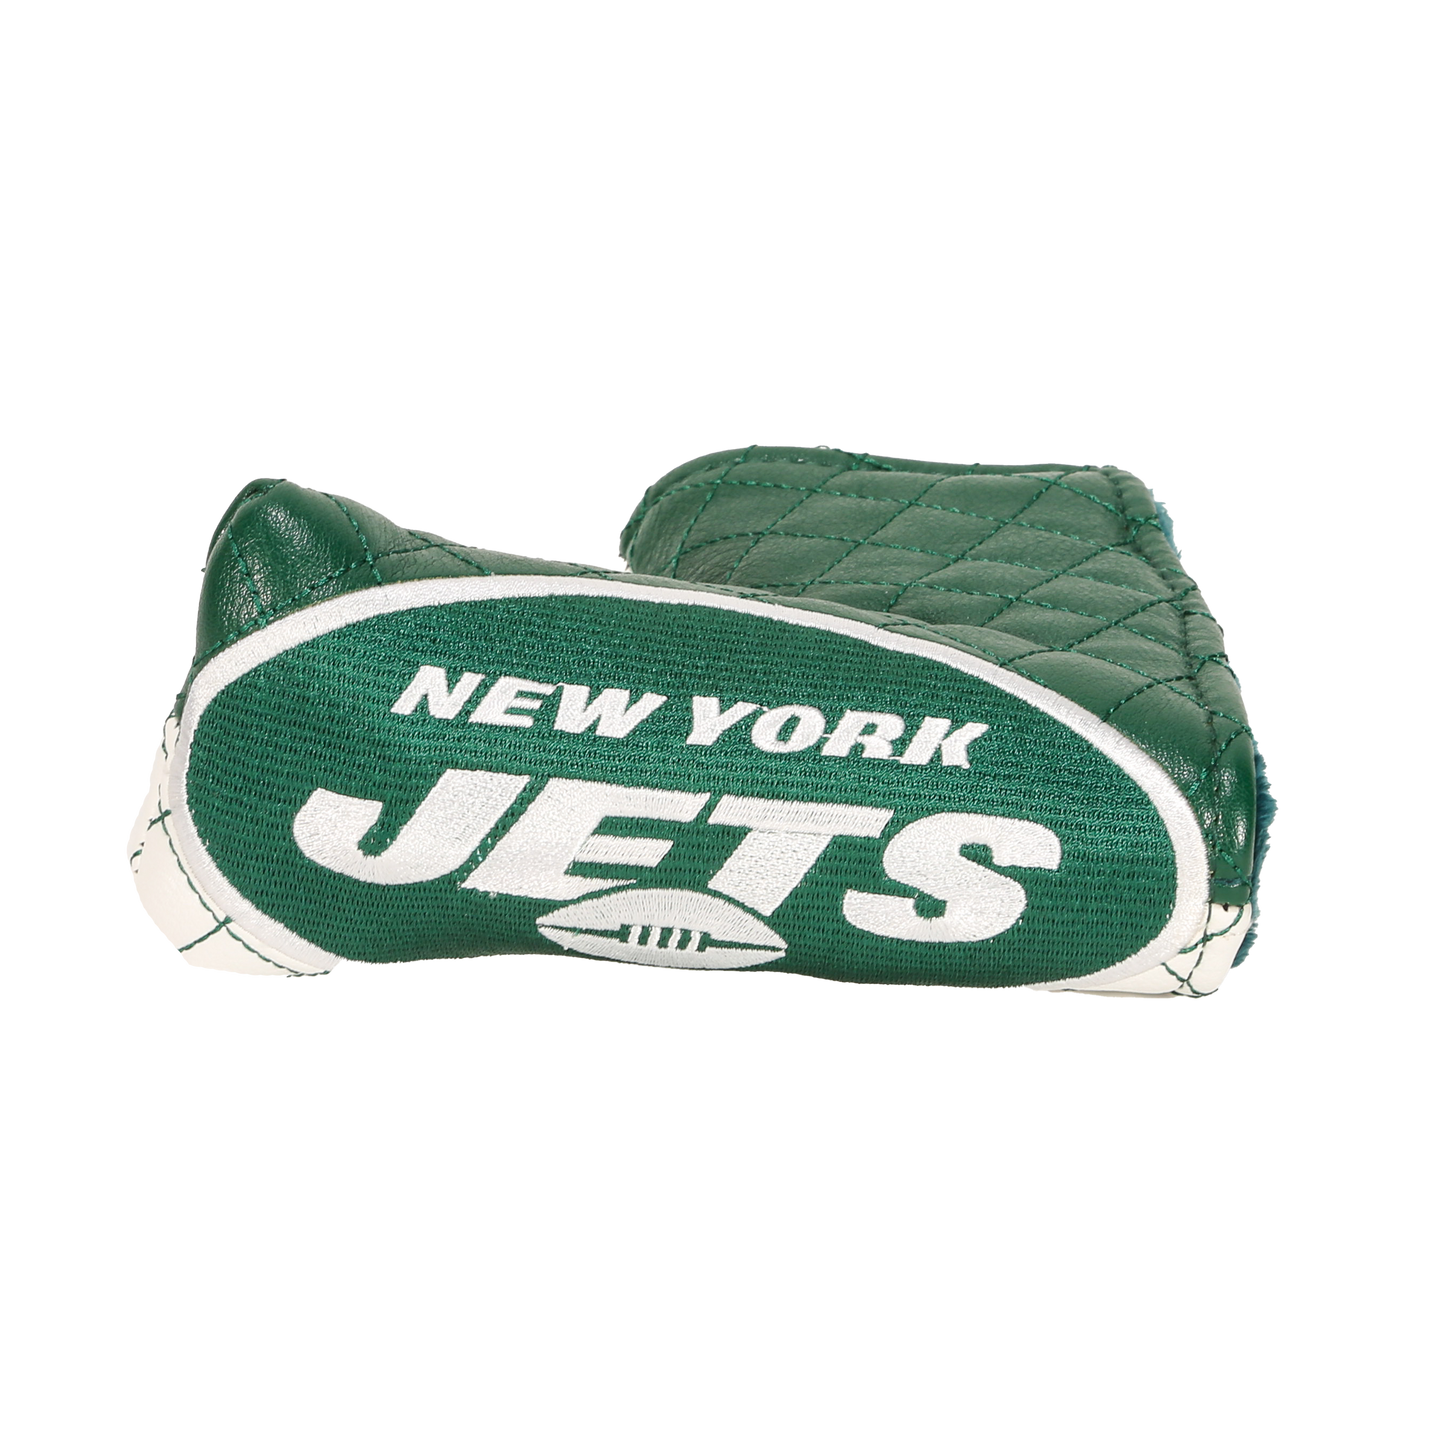 New York "Jets" Blade Putter Cover